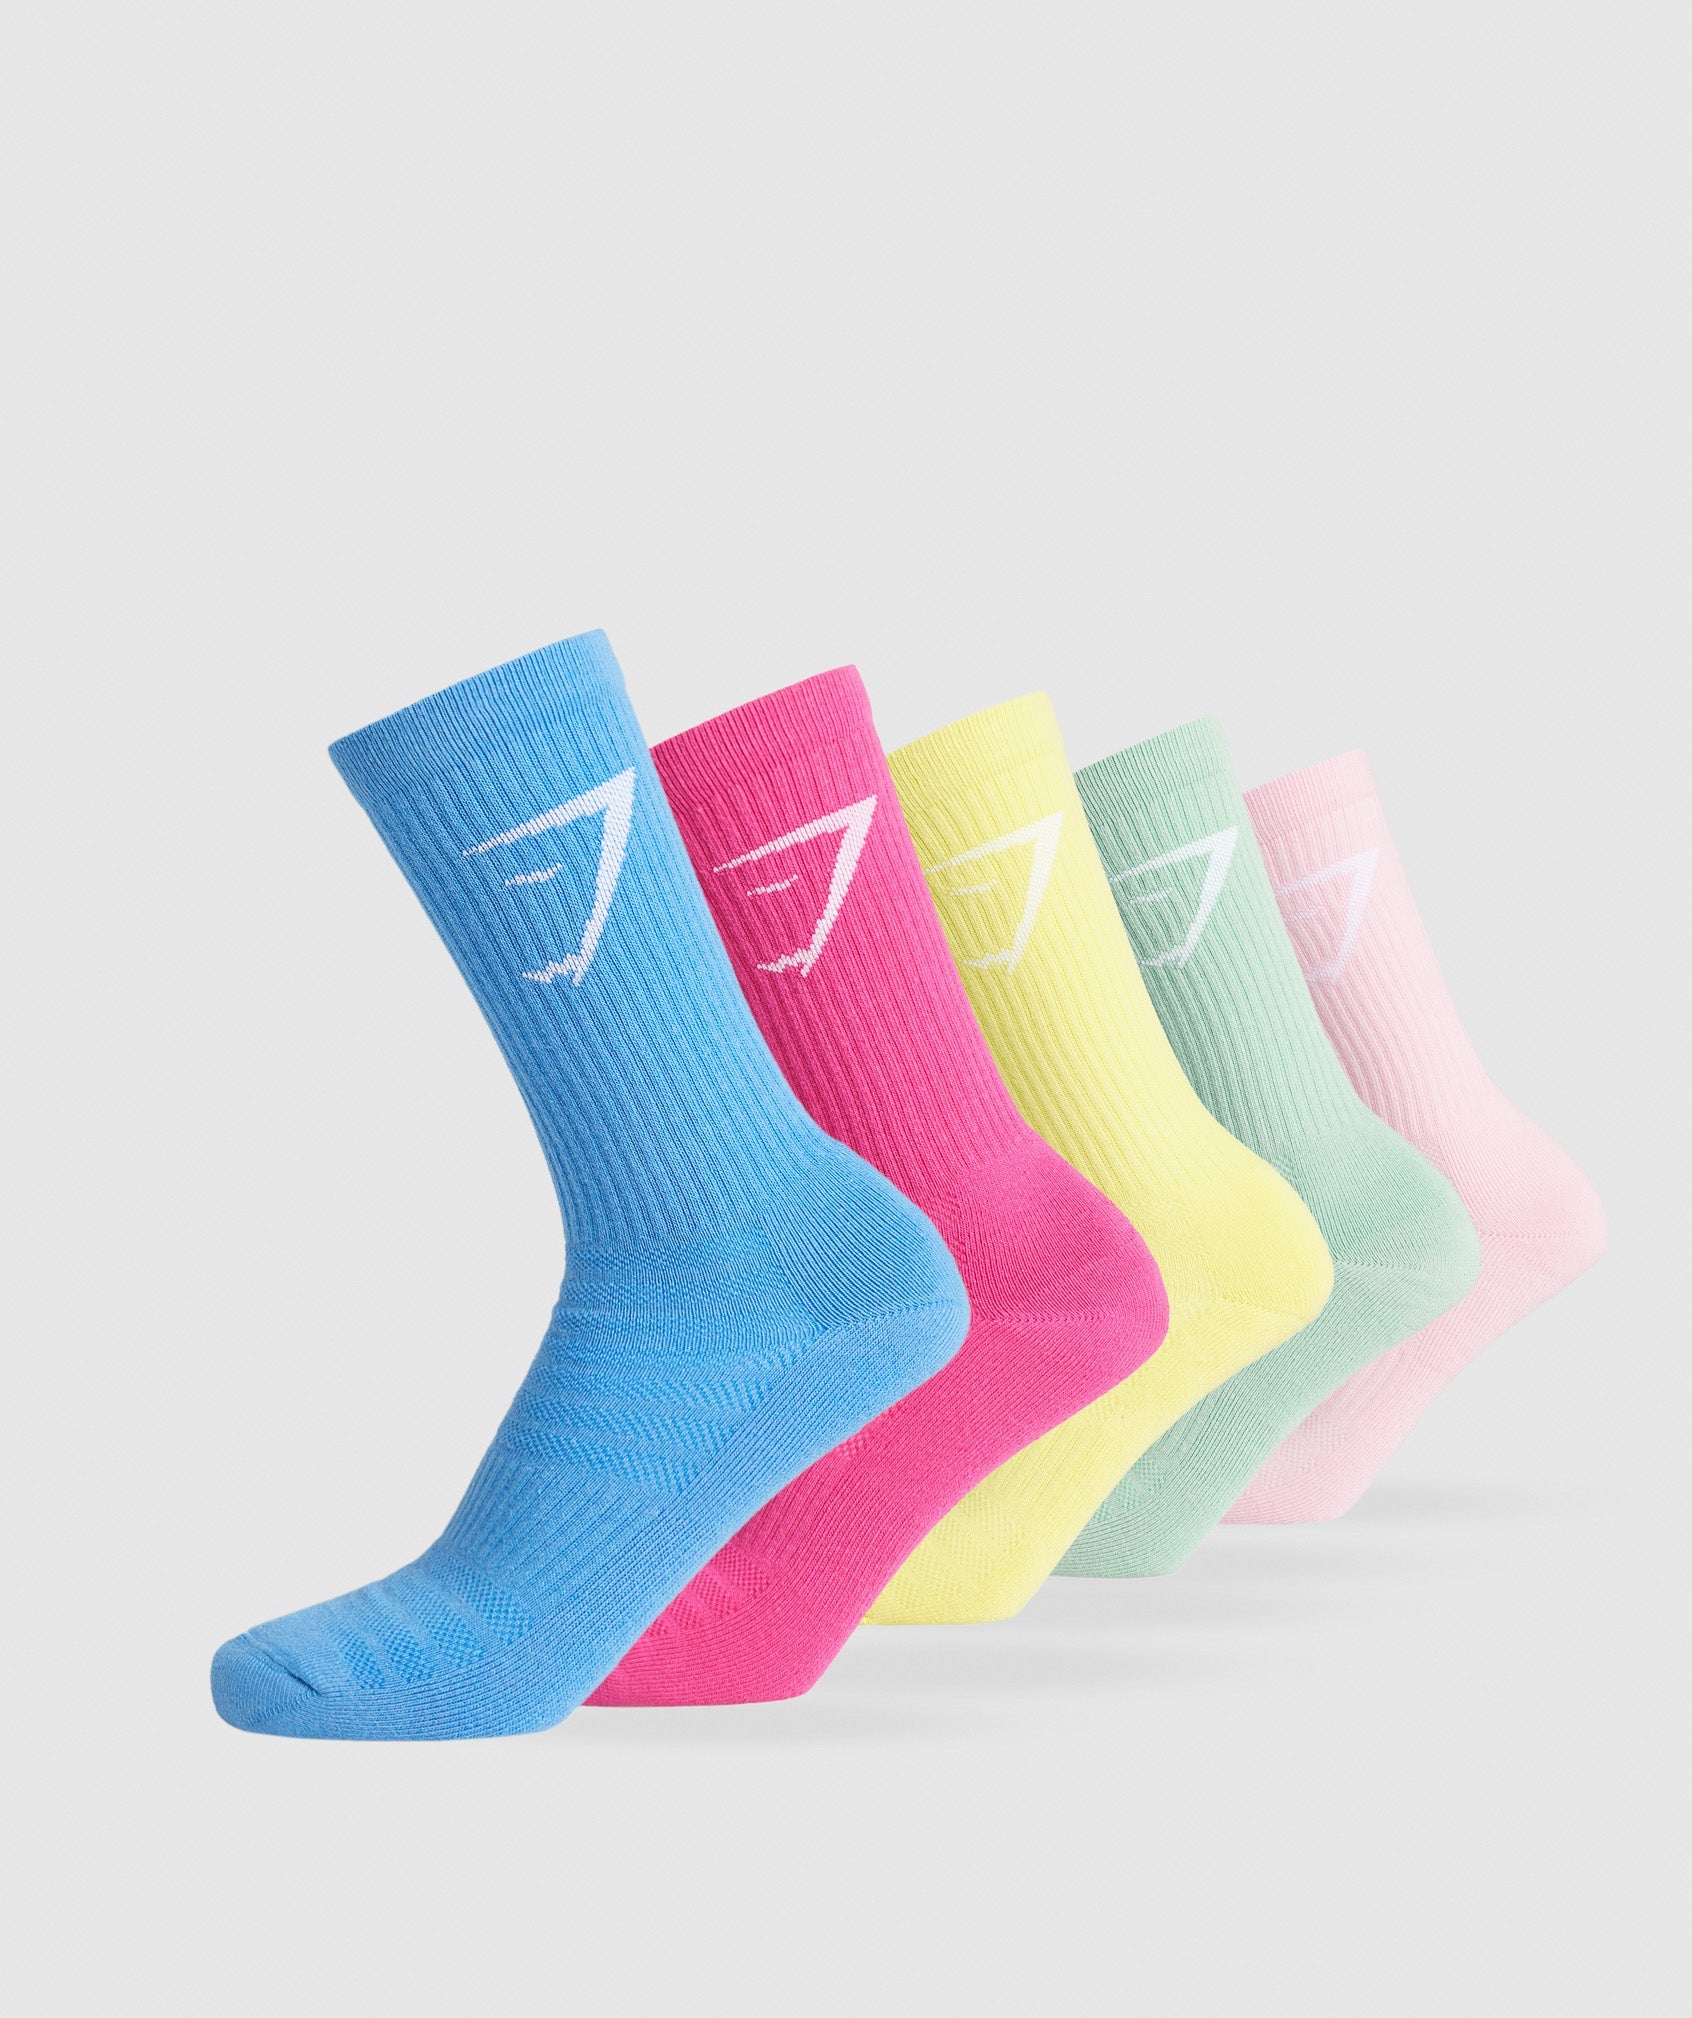 Crew Socks 5pk in Pink/Yellow/Green/Pink/Blue - view 1